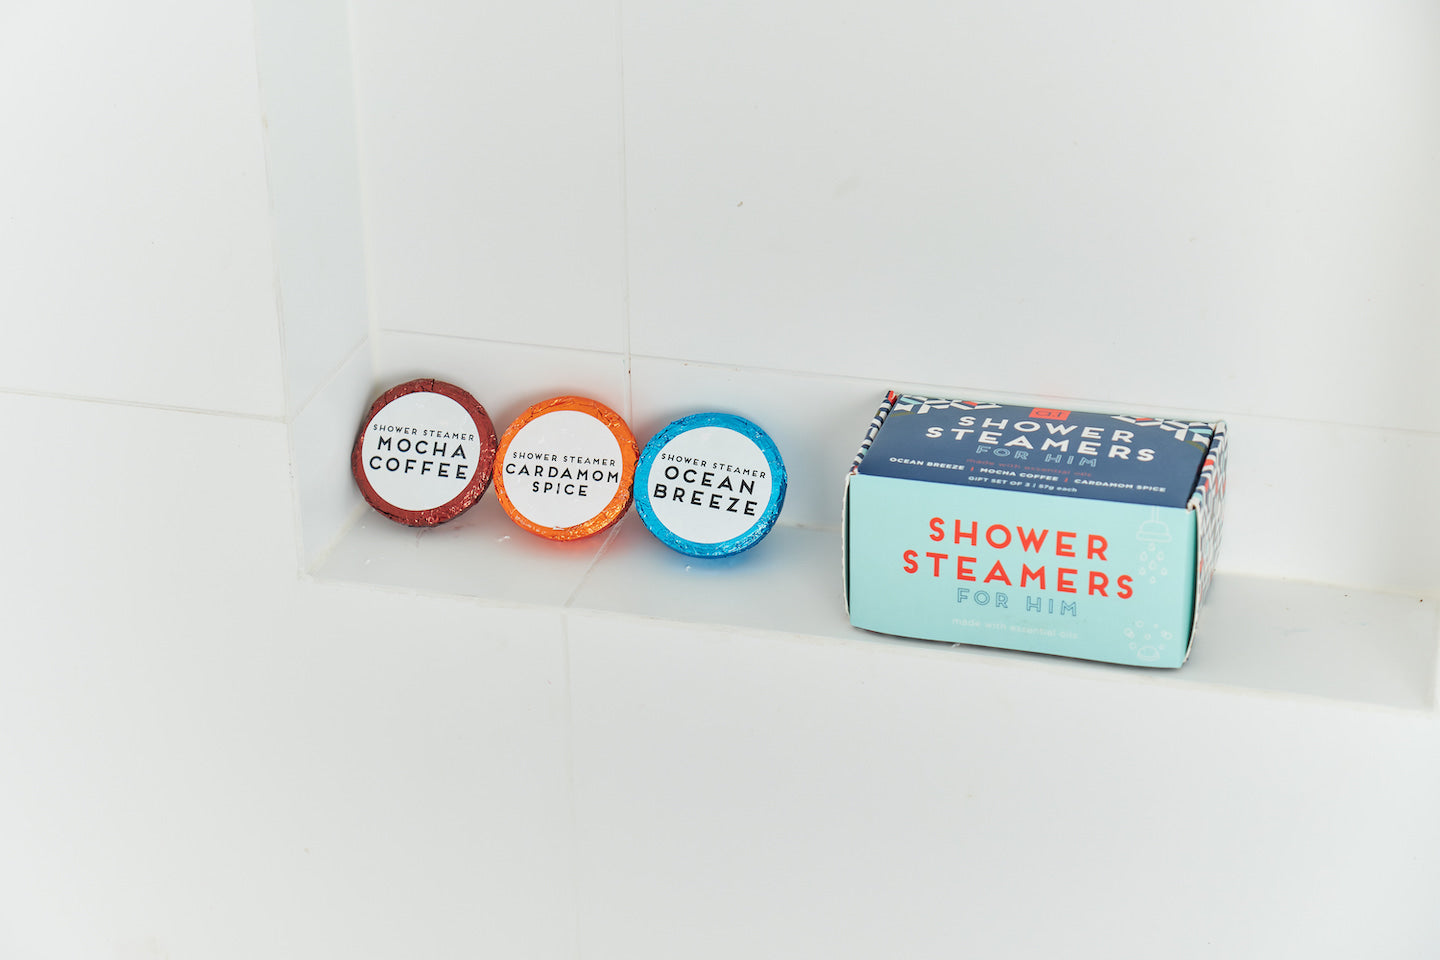 Shower Steamers & Soaps